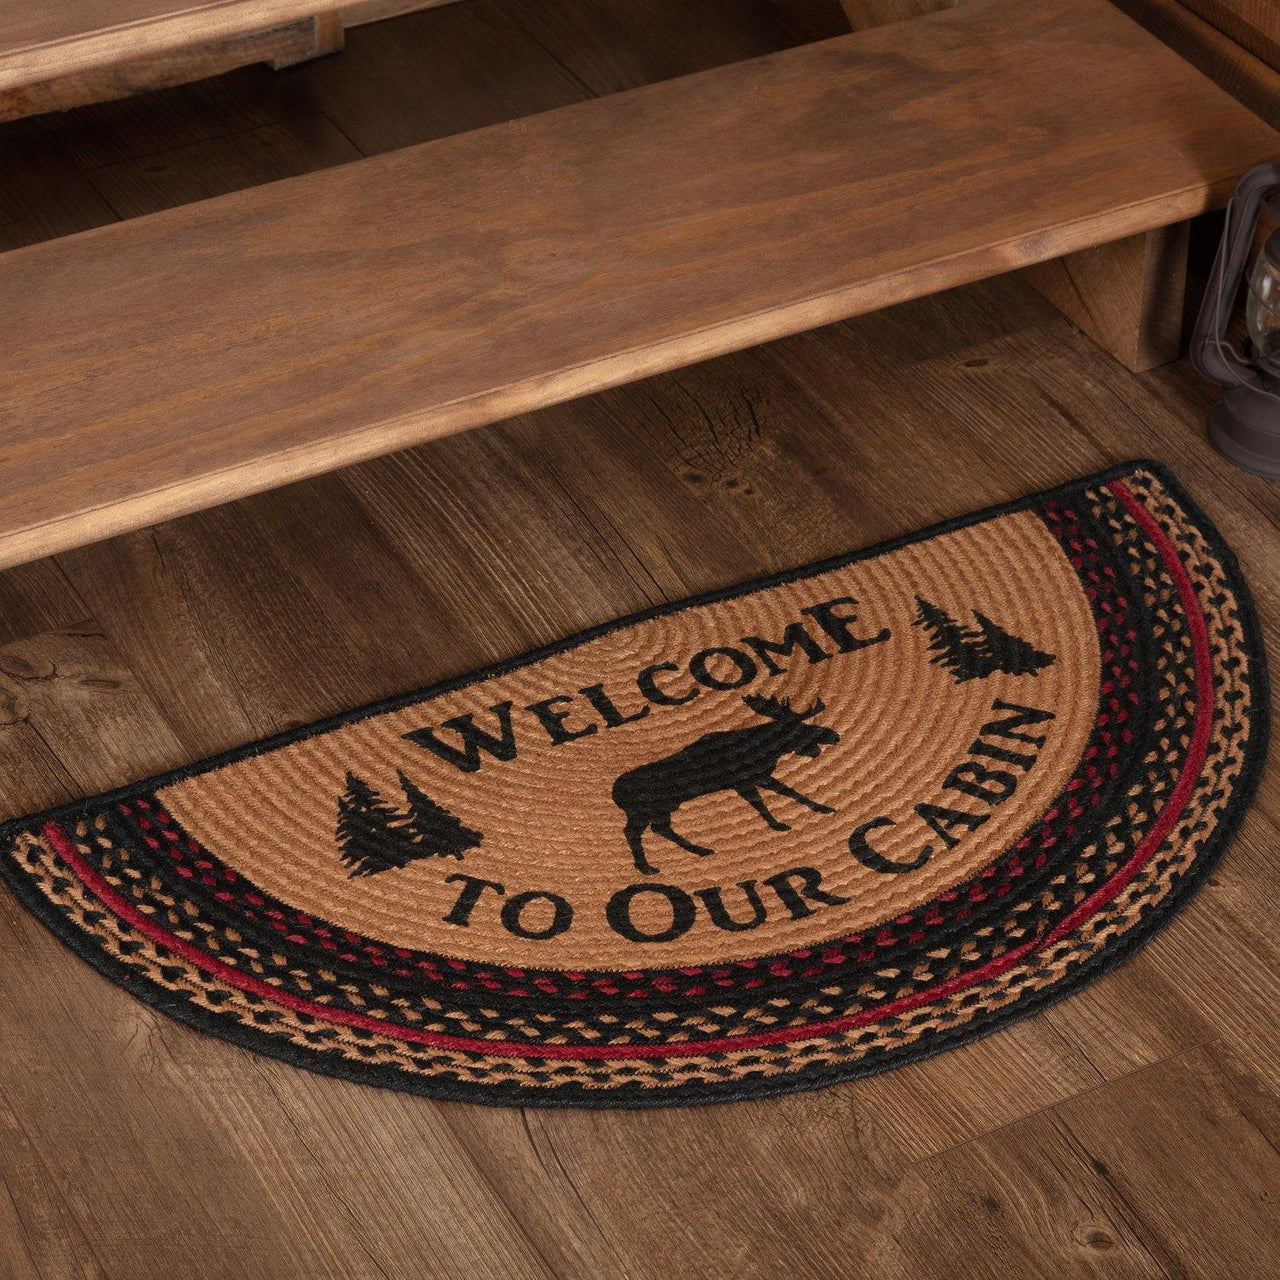 Cumberland Stenciled Moose Jute Braided Rug Half Circle Welcome to the Cabin 16.5"x33" with Rug Pad VHC Brands - The Fox Decor